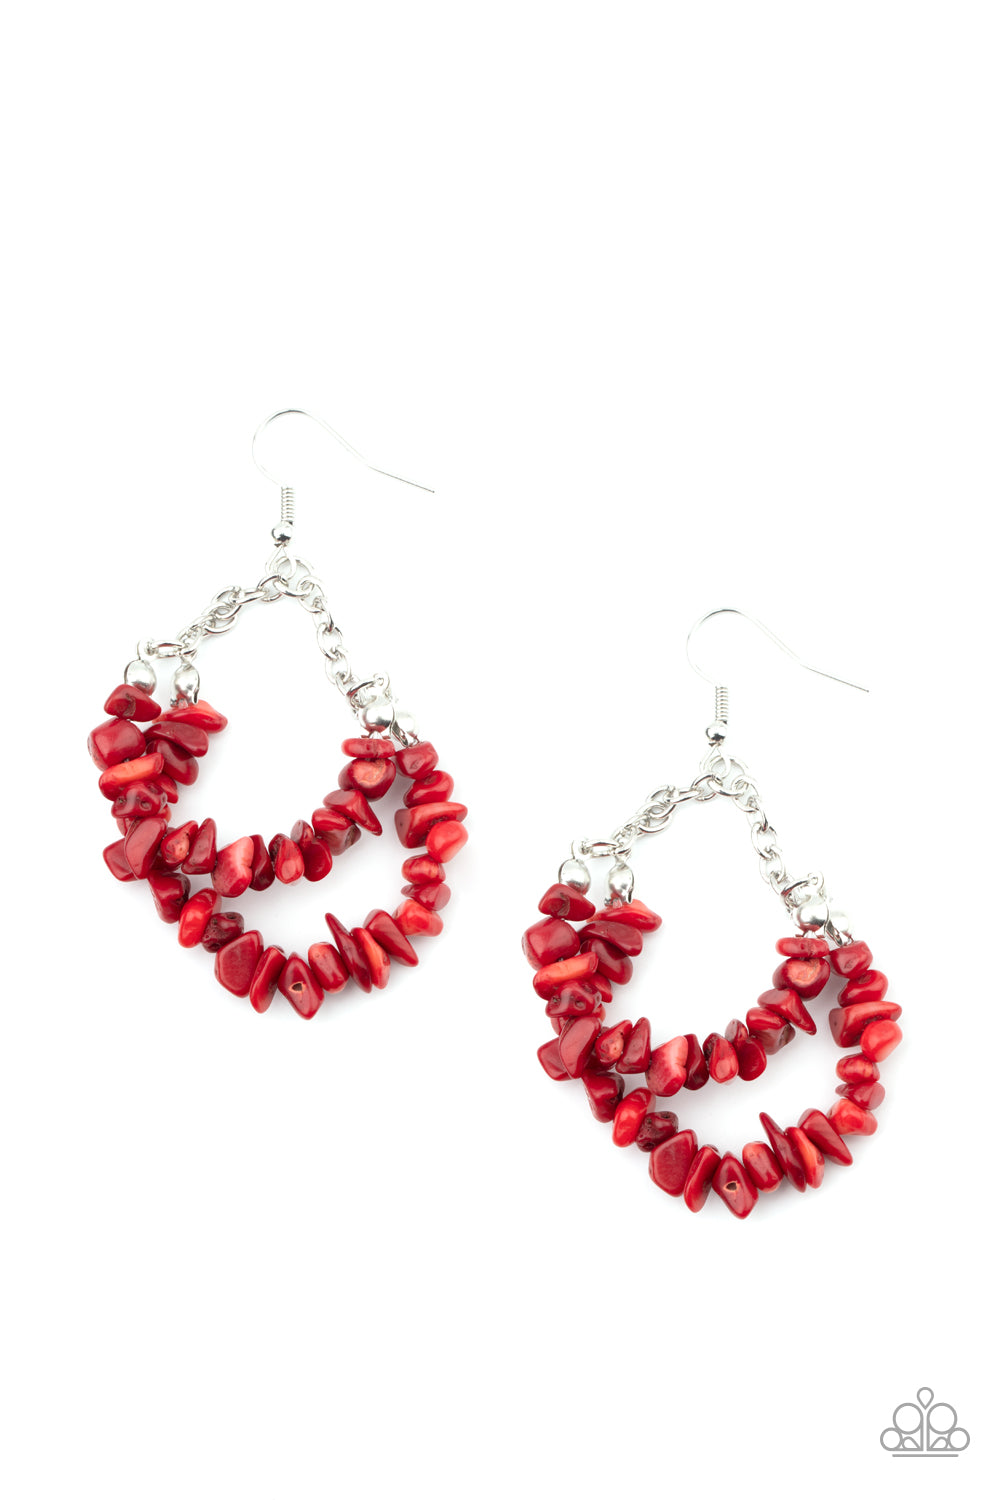 Red fiery pebble-like earrings, threaded on a thin silver hoop. Soft and sassy look for any occasion. 